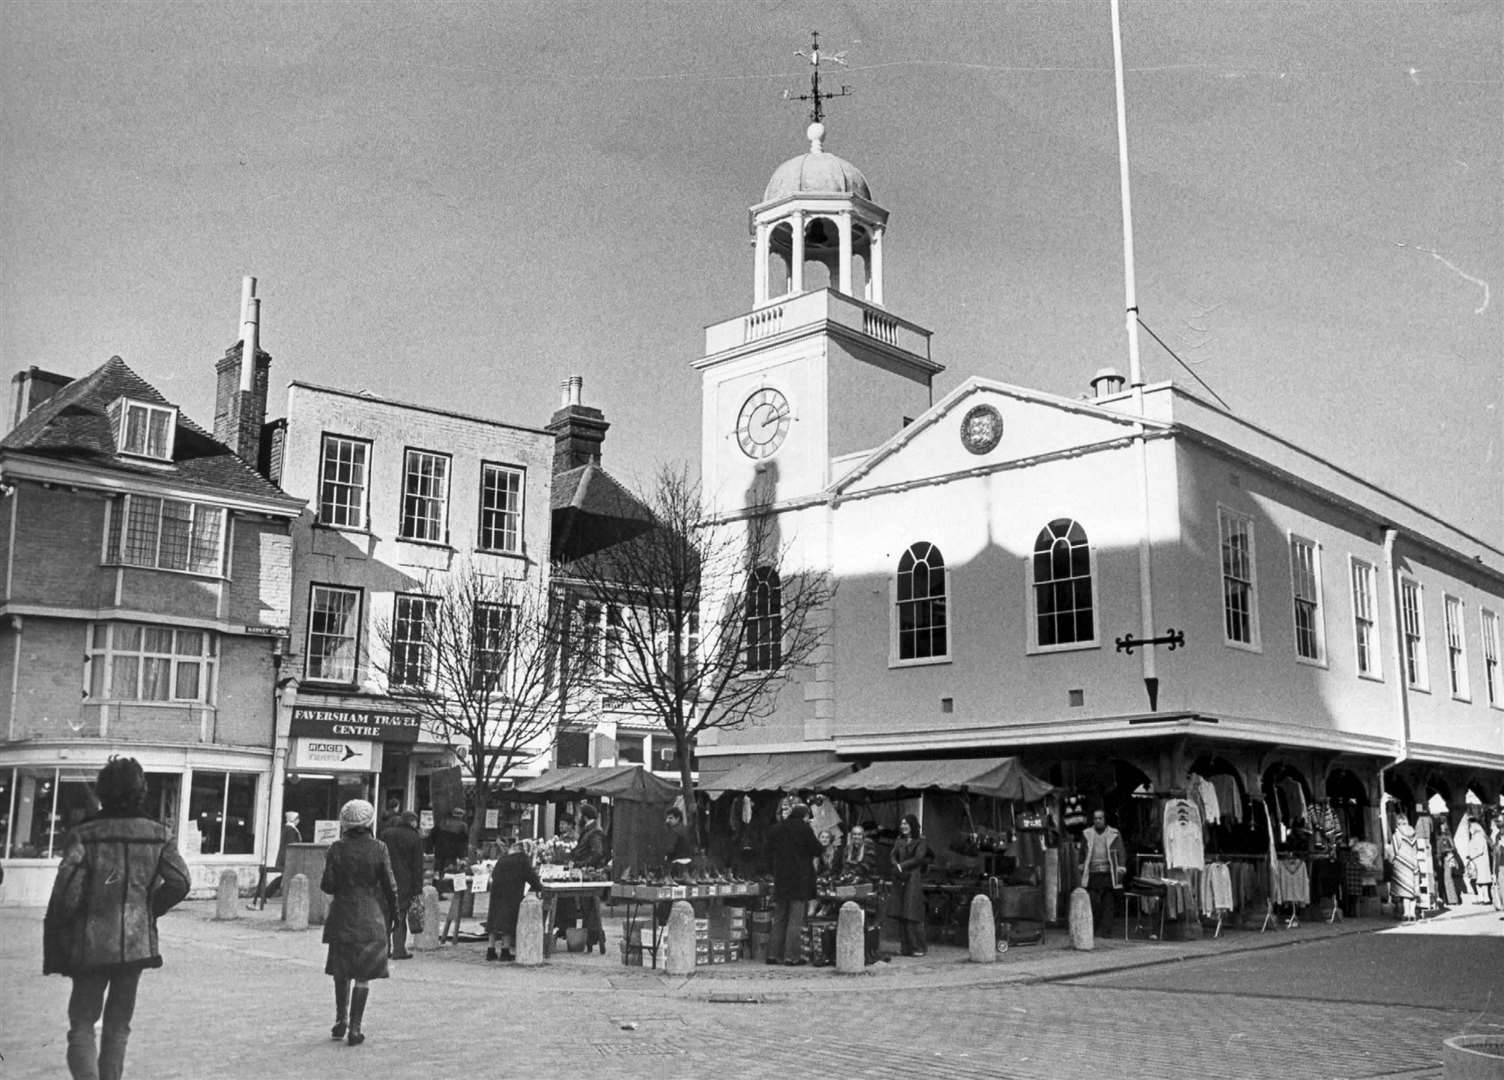 Faversham market outside the town hall in February 1979